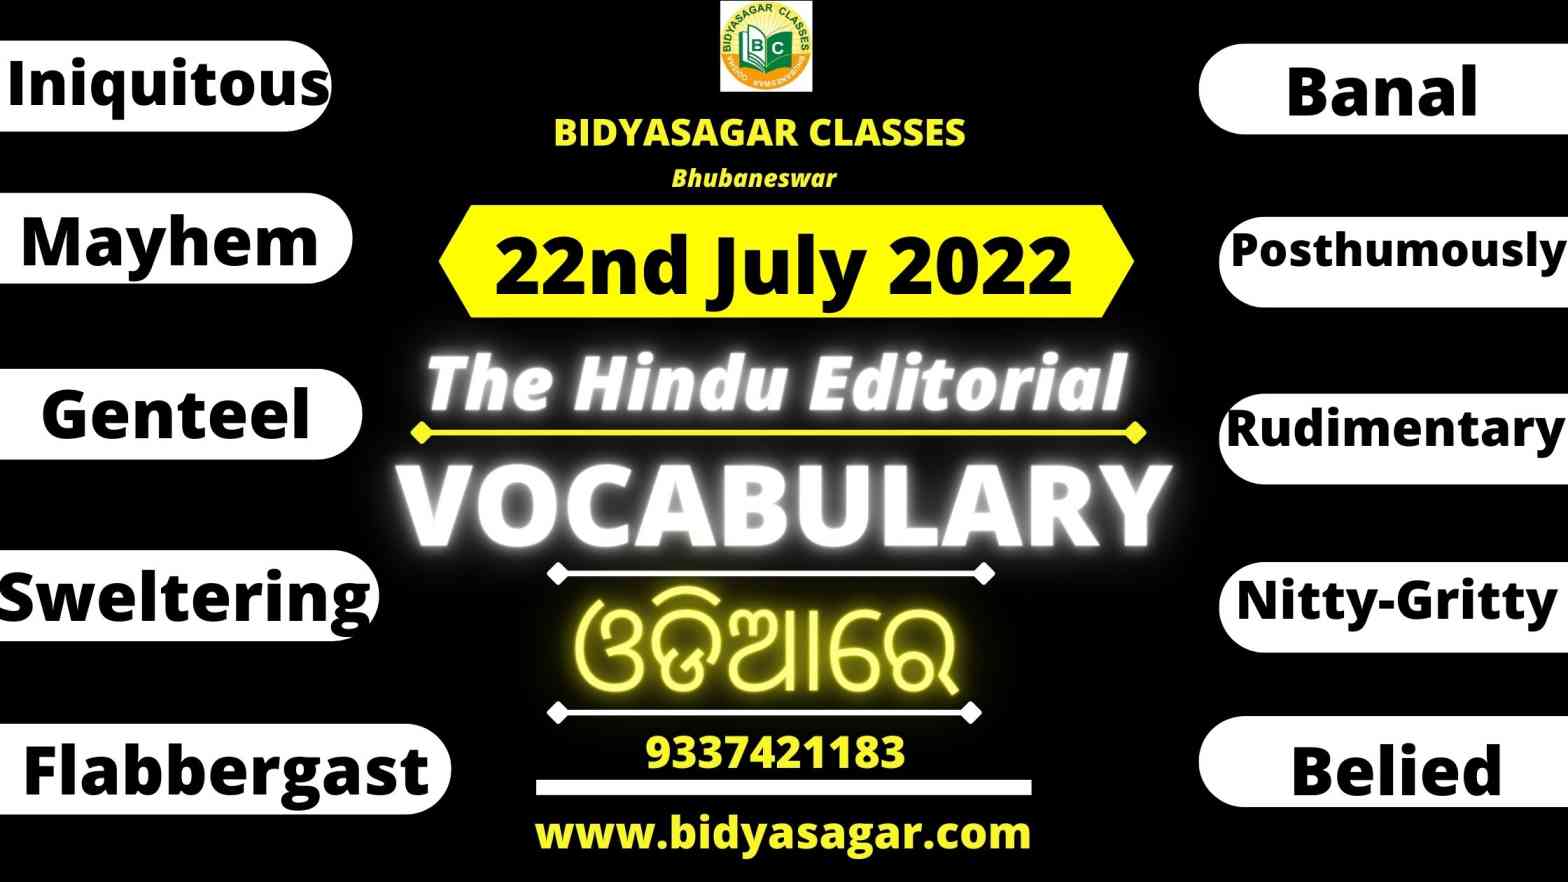 The Hindu Editorial Vocabulary of 22nd July 2022